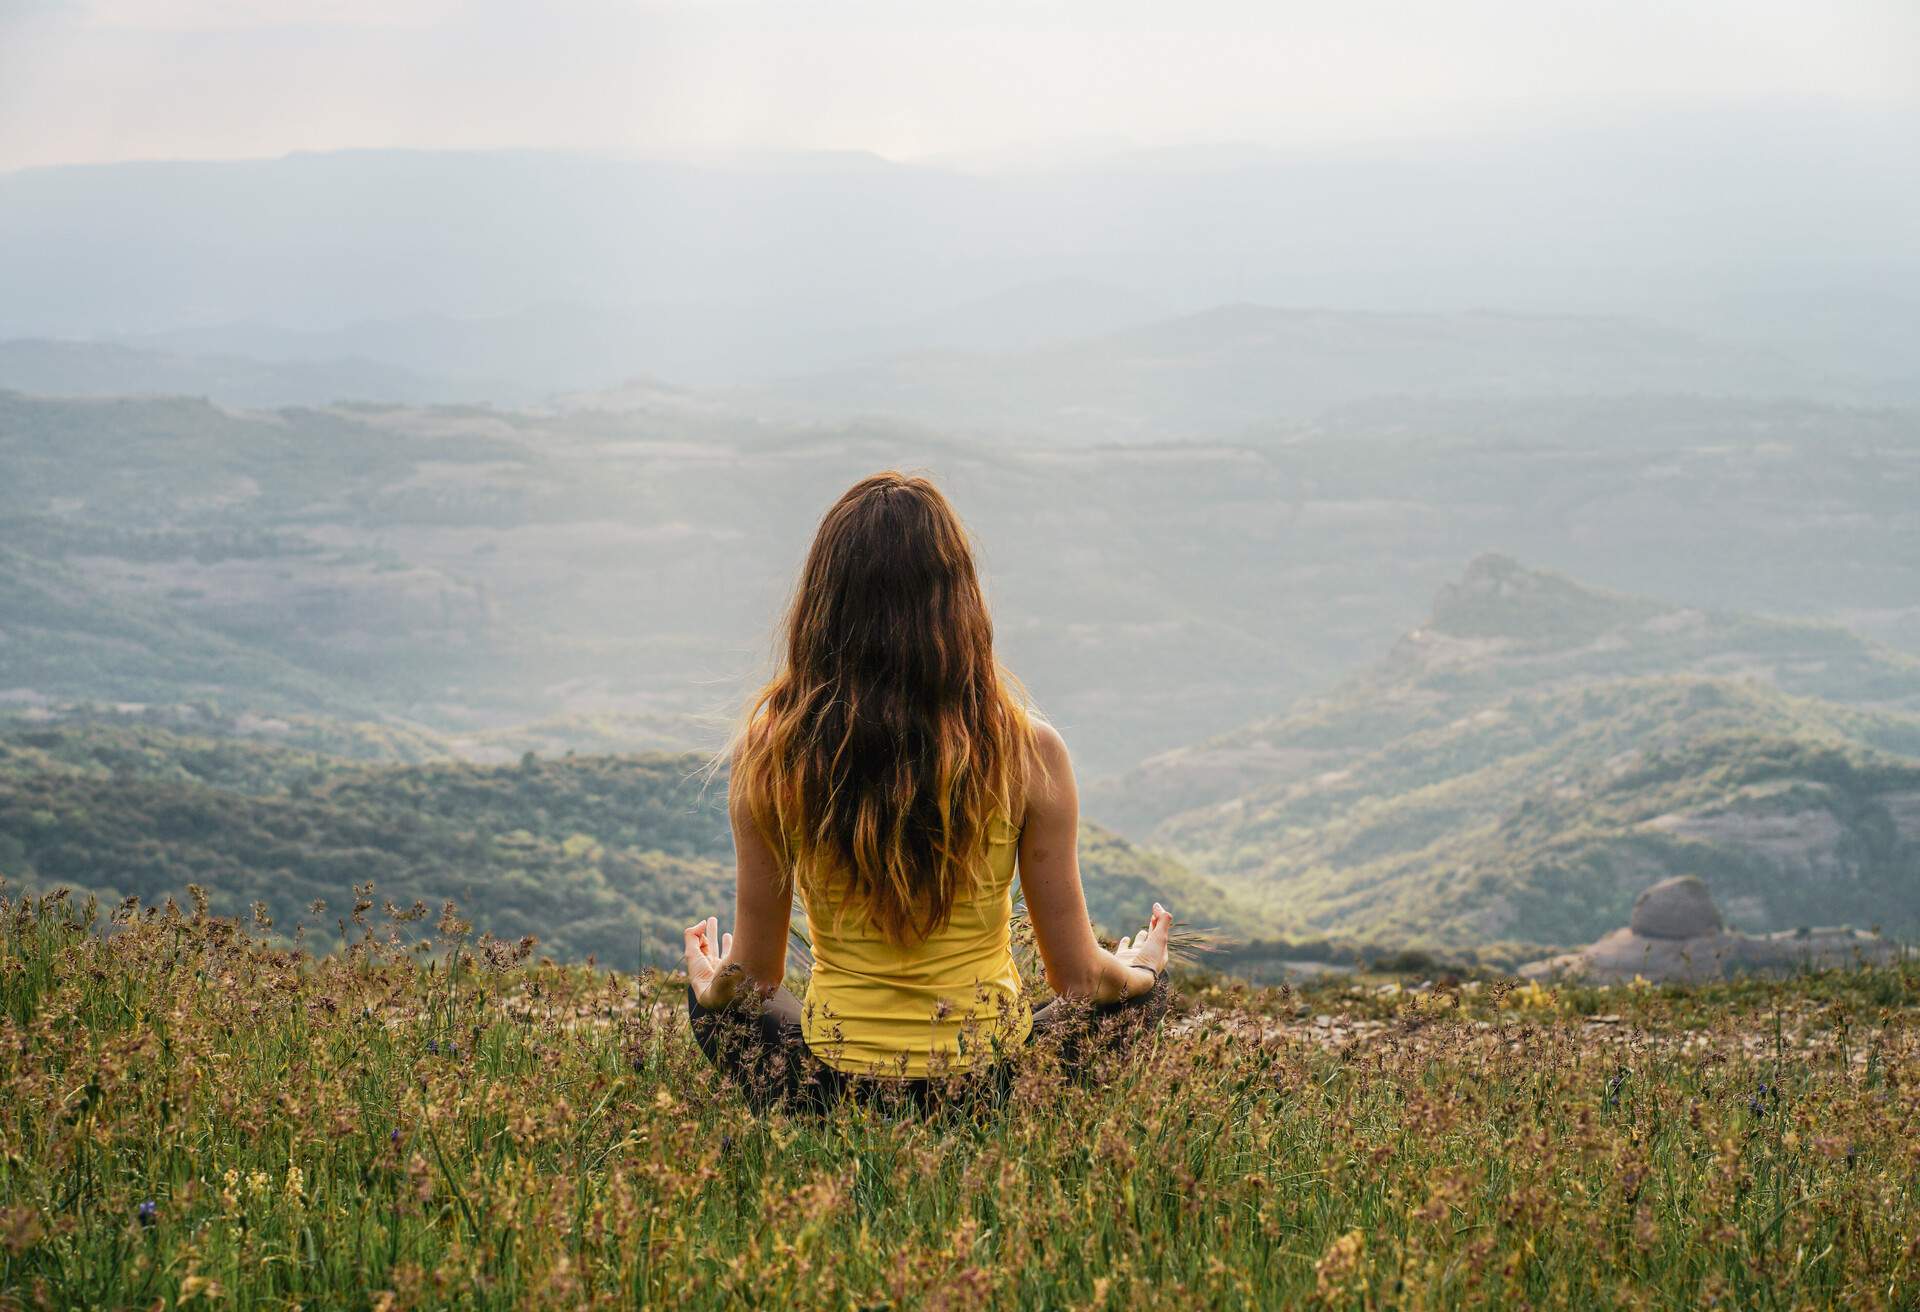 A woman in yellow shirt sit in a meditative pose on a hill with overlooking views of the mountains.